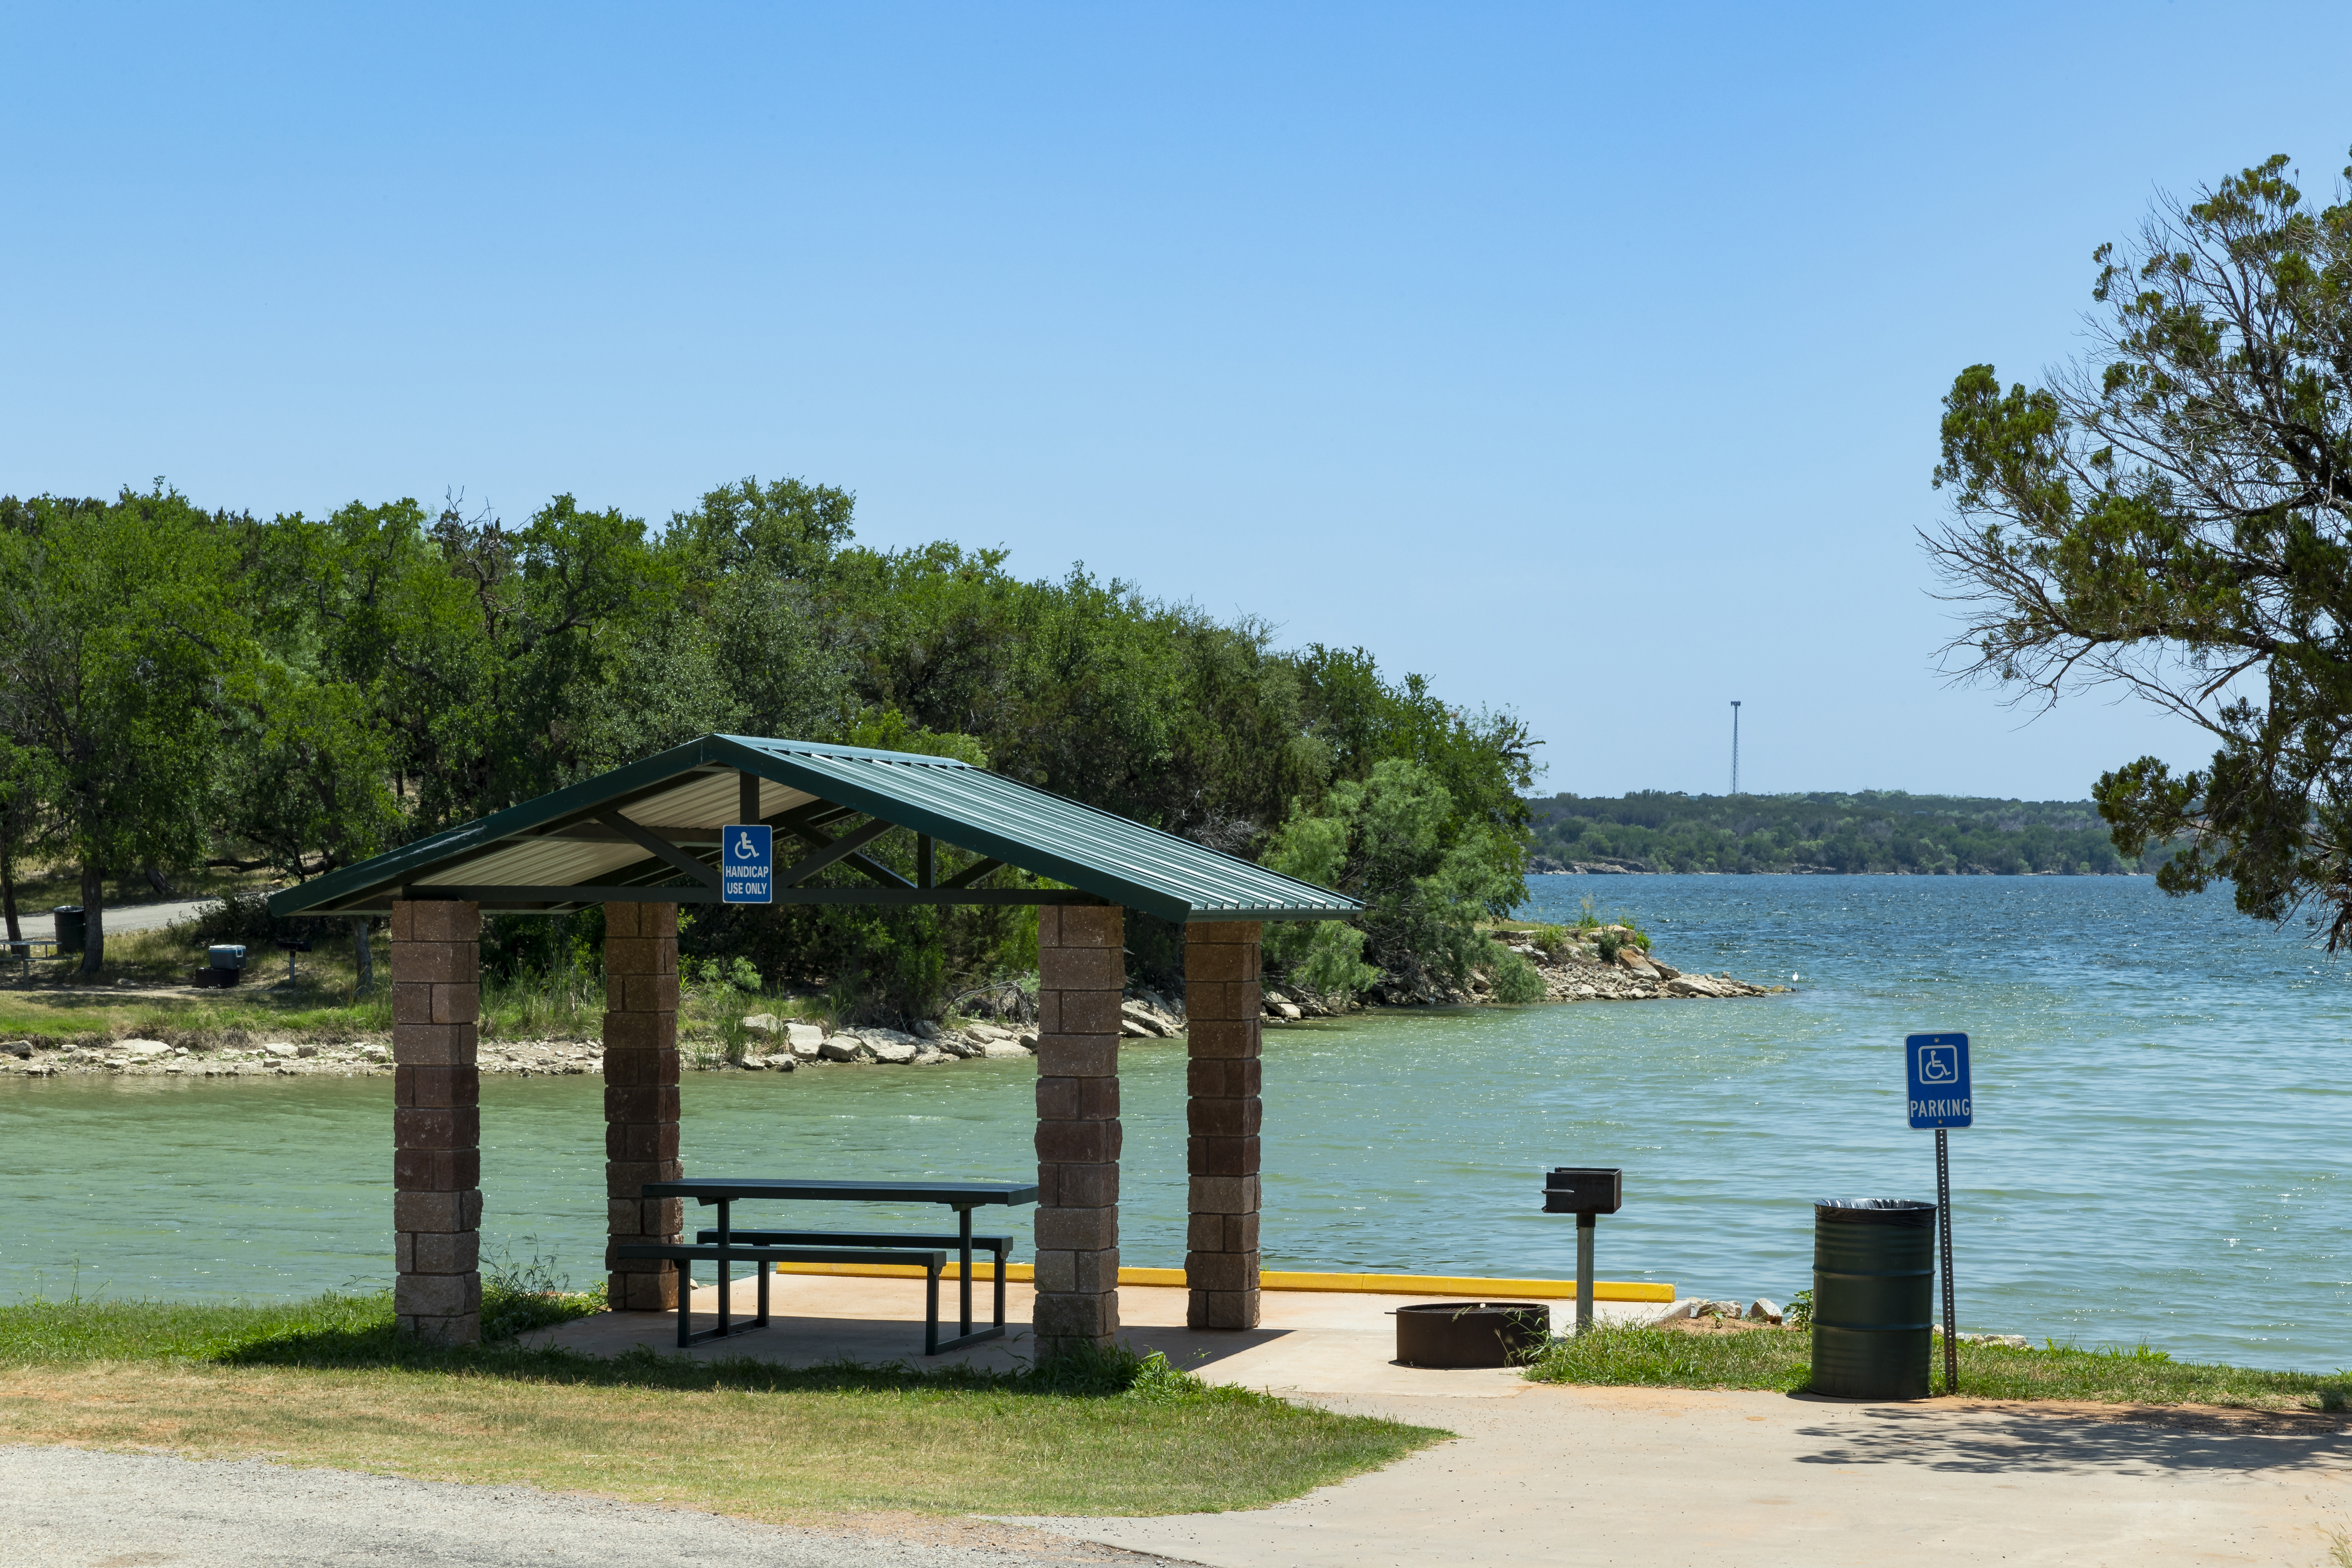 A campground in front of a body of water